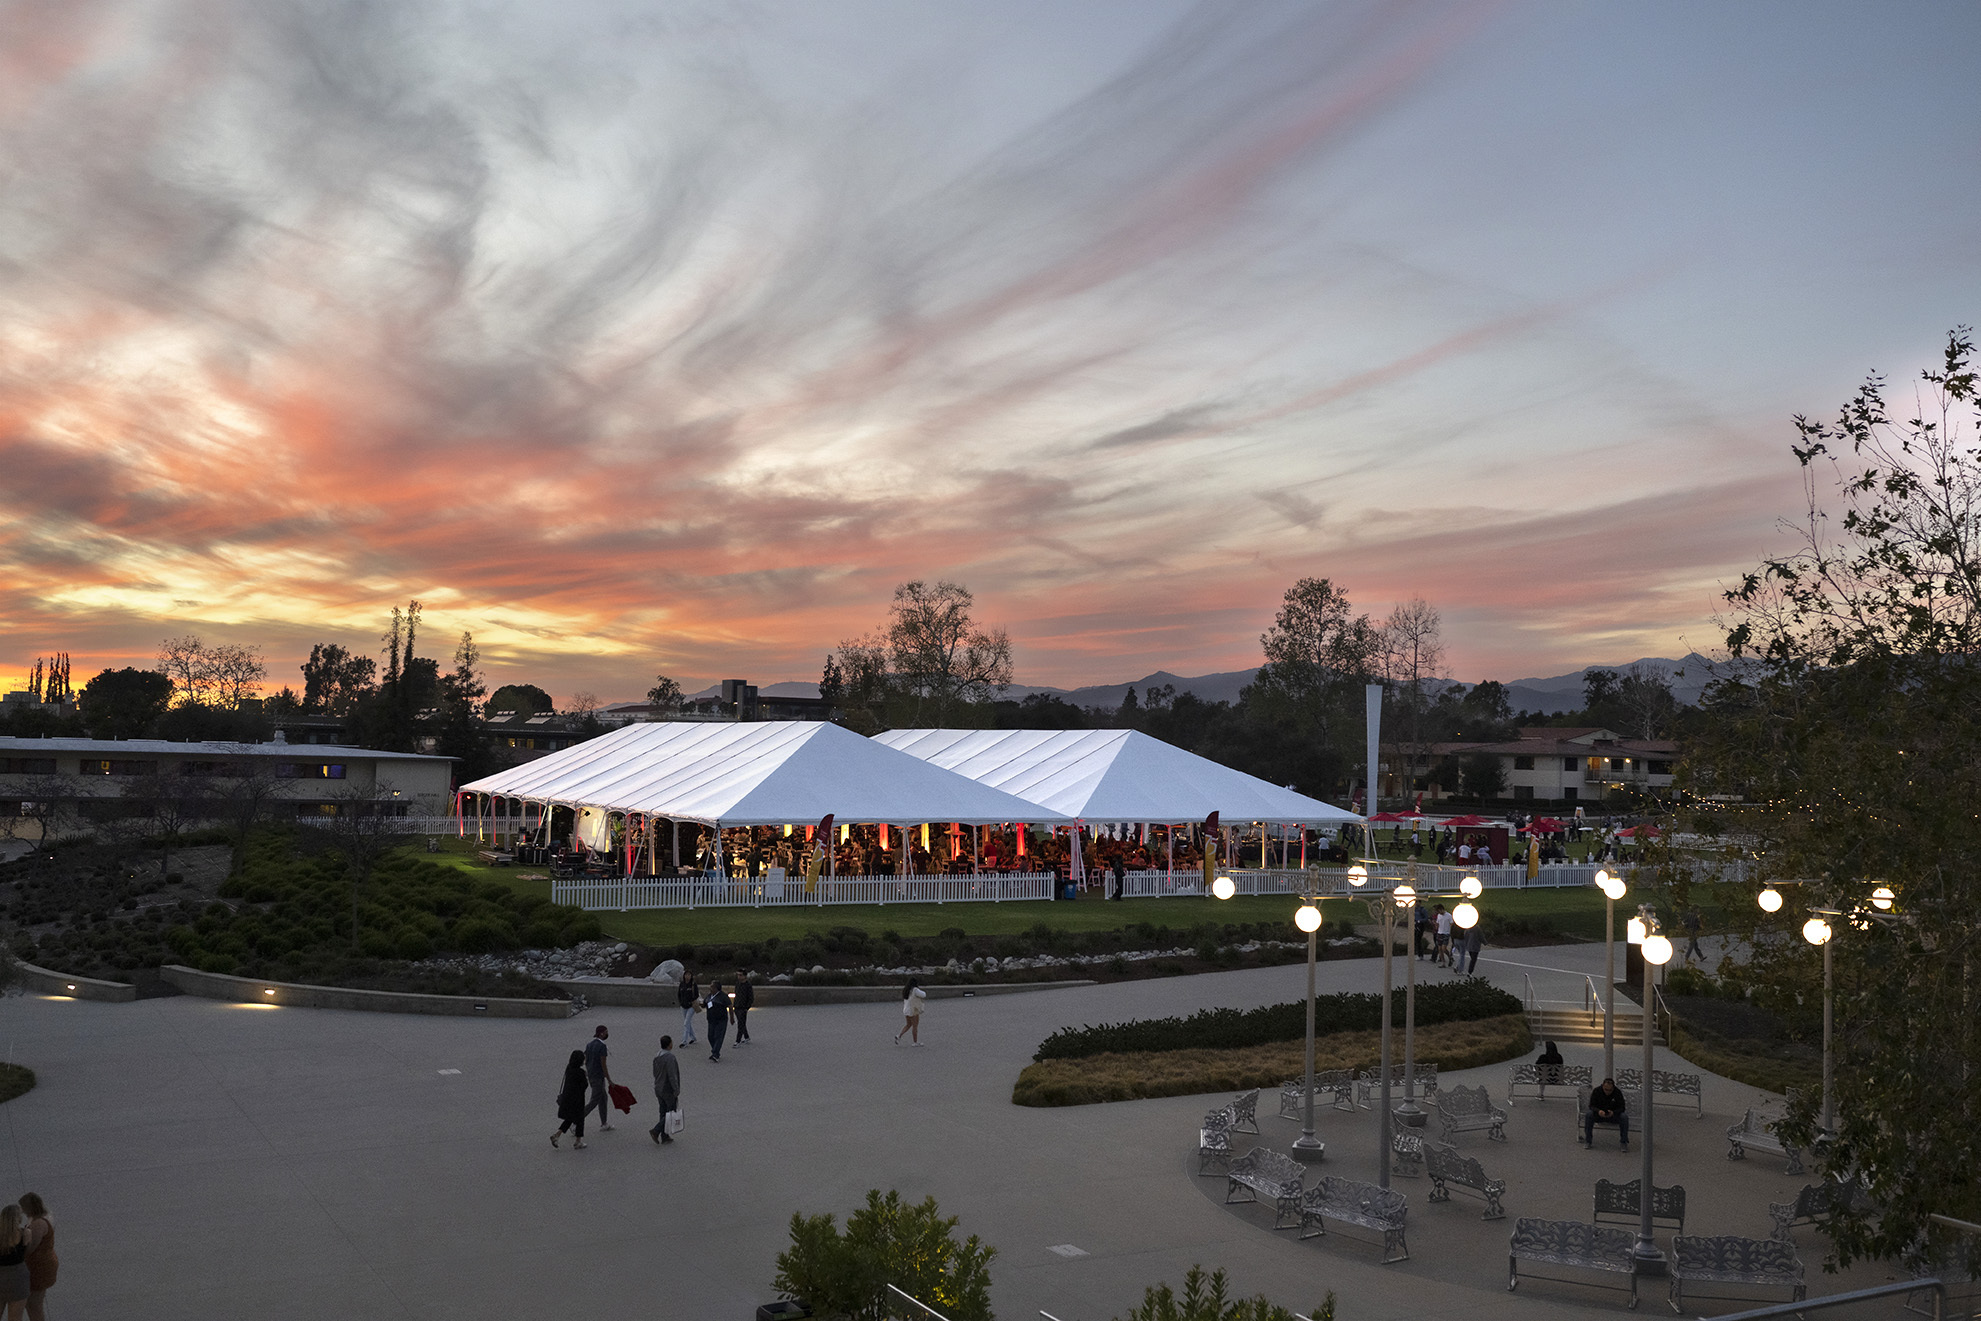 The sunsets displays vivid oranges, pinks, and yellows behind white event tents full of CMC community members.